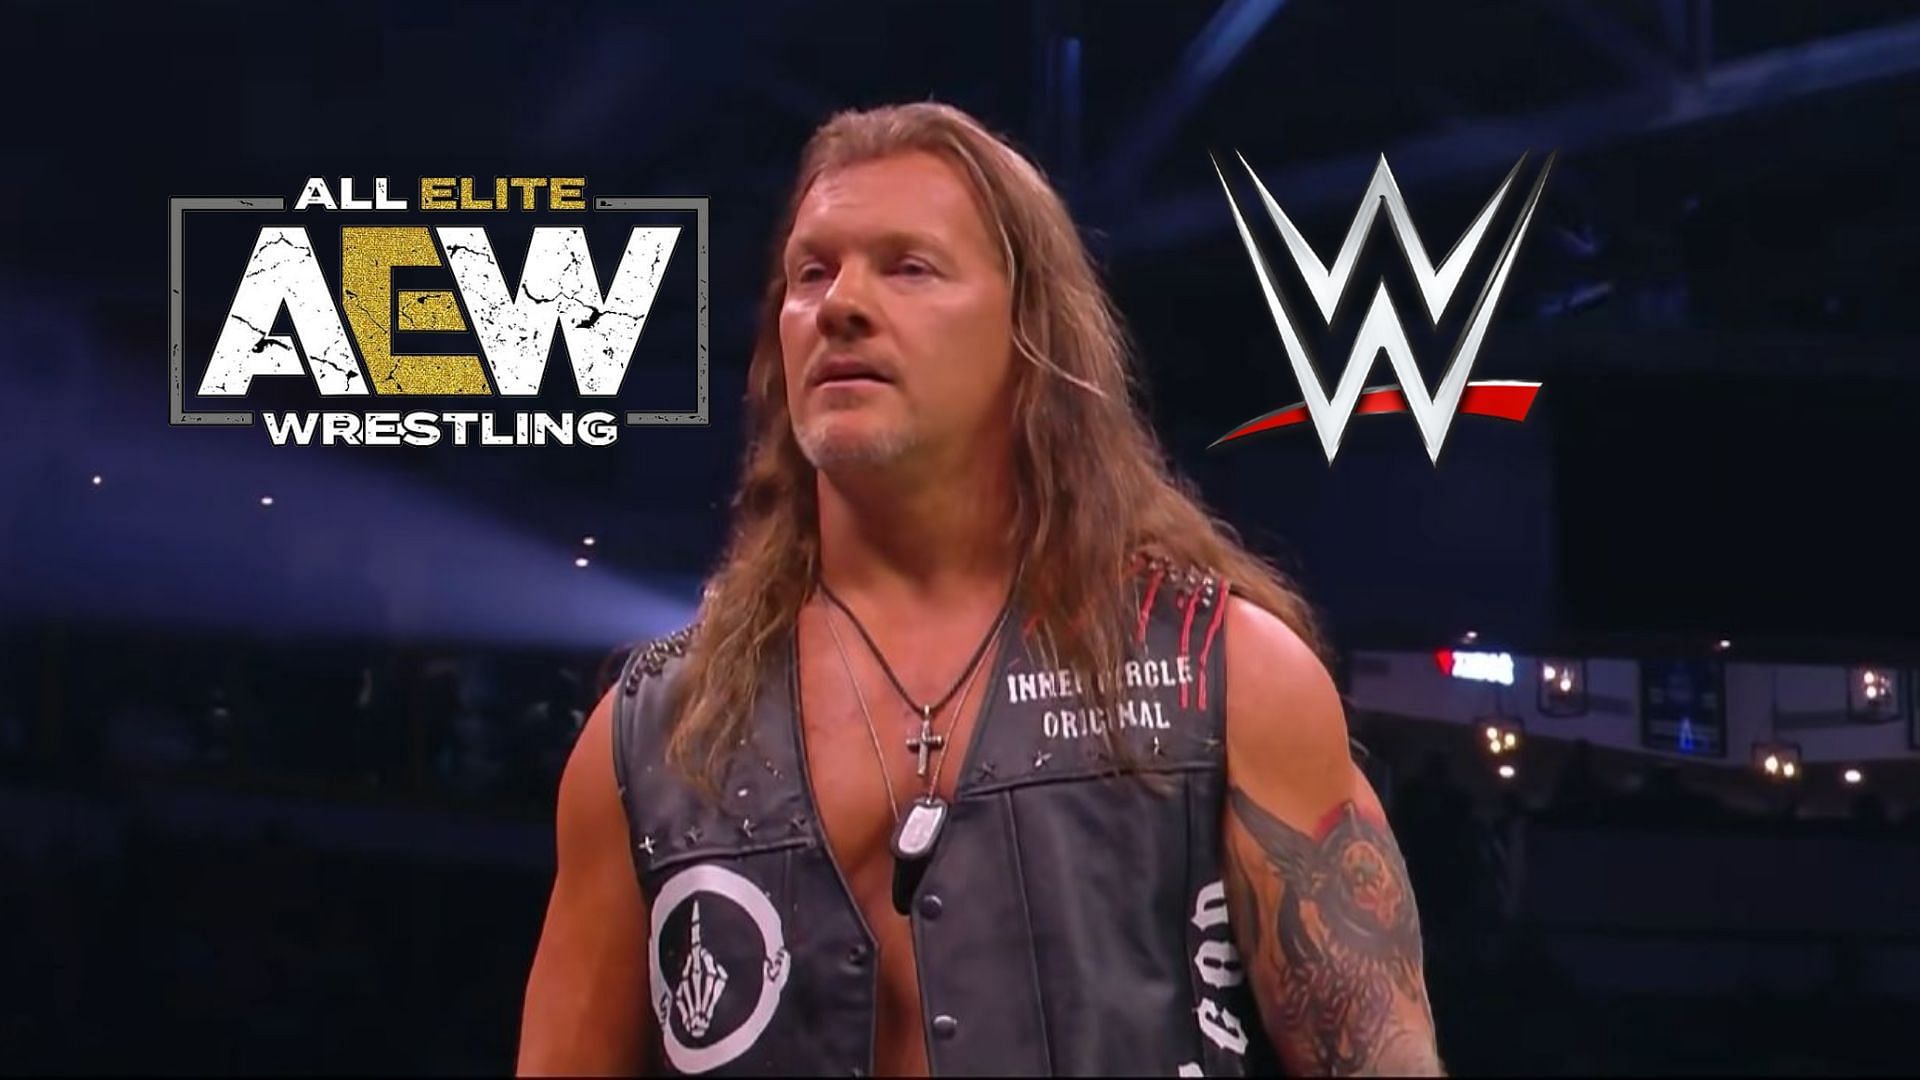 WWE legend Chris Jericho once feuded with this AEW star.